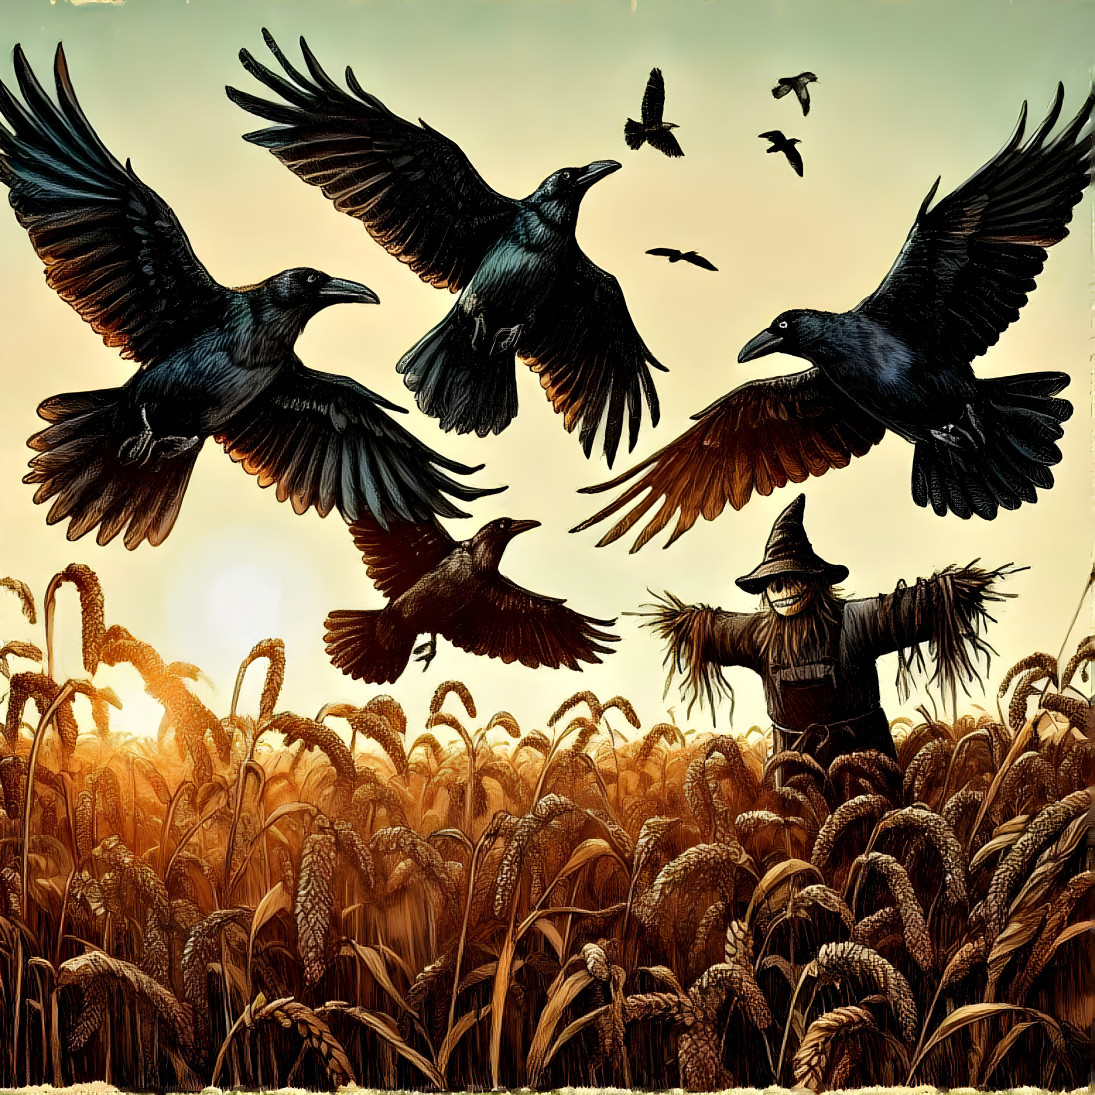 Common Ravens circling above a cornfield